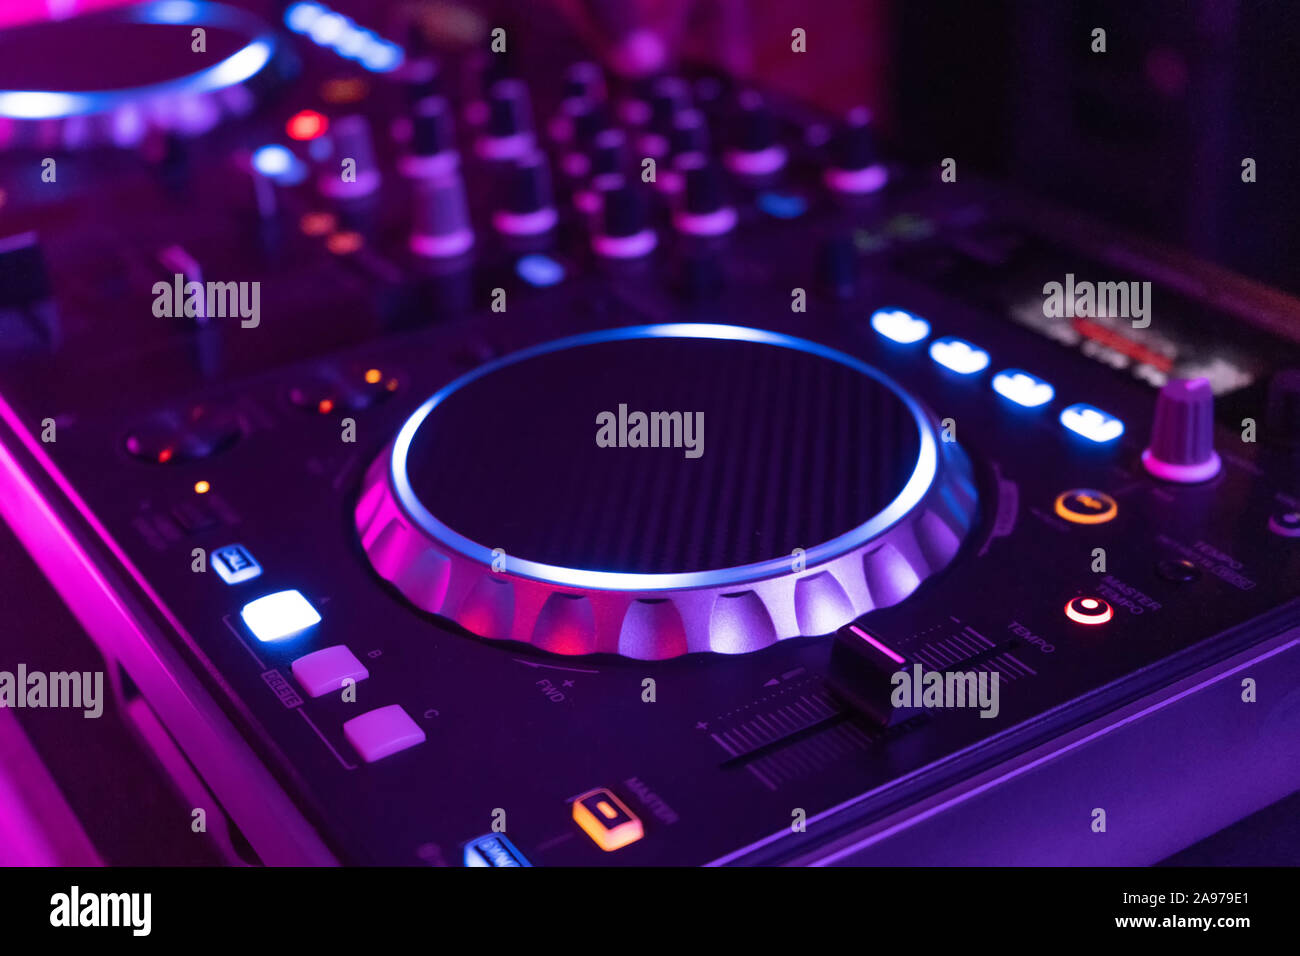 DJ playing music.Midi controller turntable.New digital technology for mixing audio tracks.Sound mixer with turntables.Disc jockey mix music at party Stock Photo